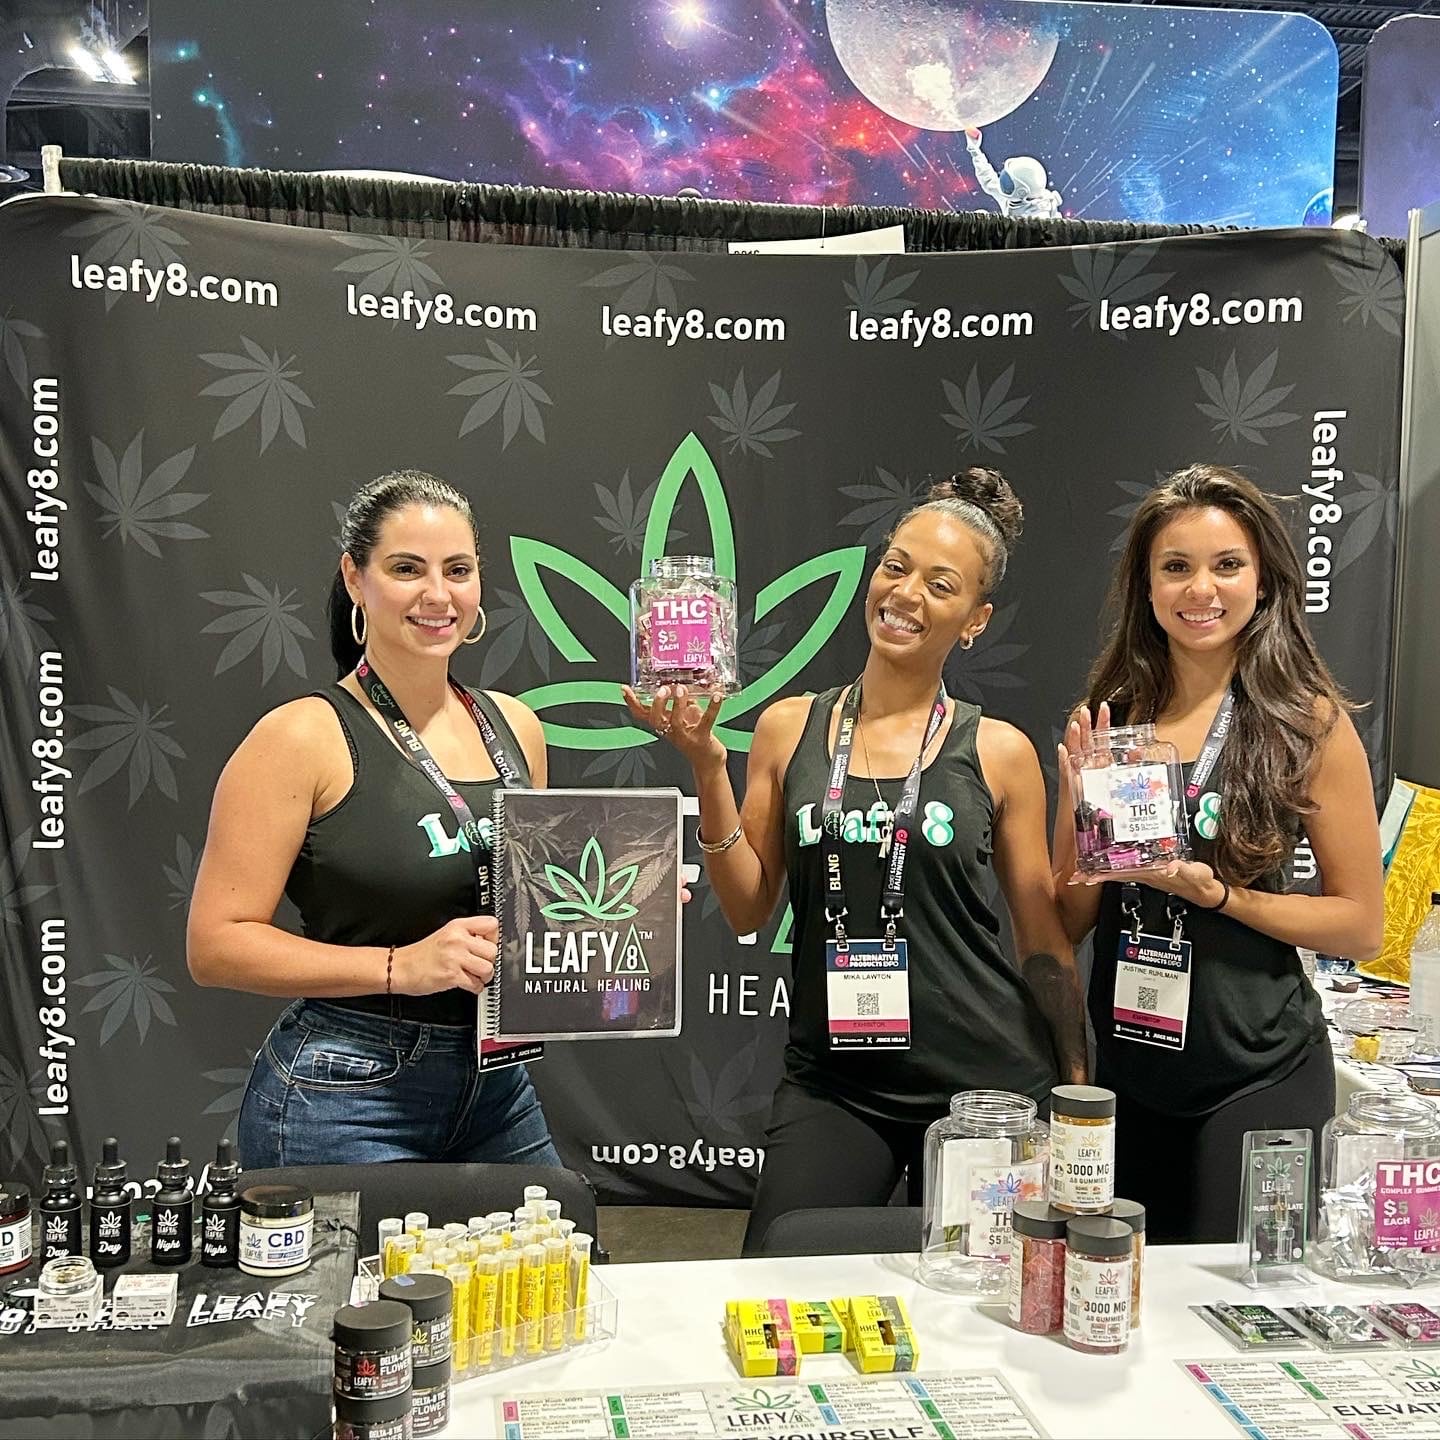 A Deeper Look at Leafy8 at The Alternative Products Expo Tampa 2022